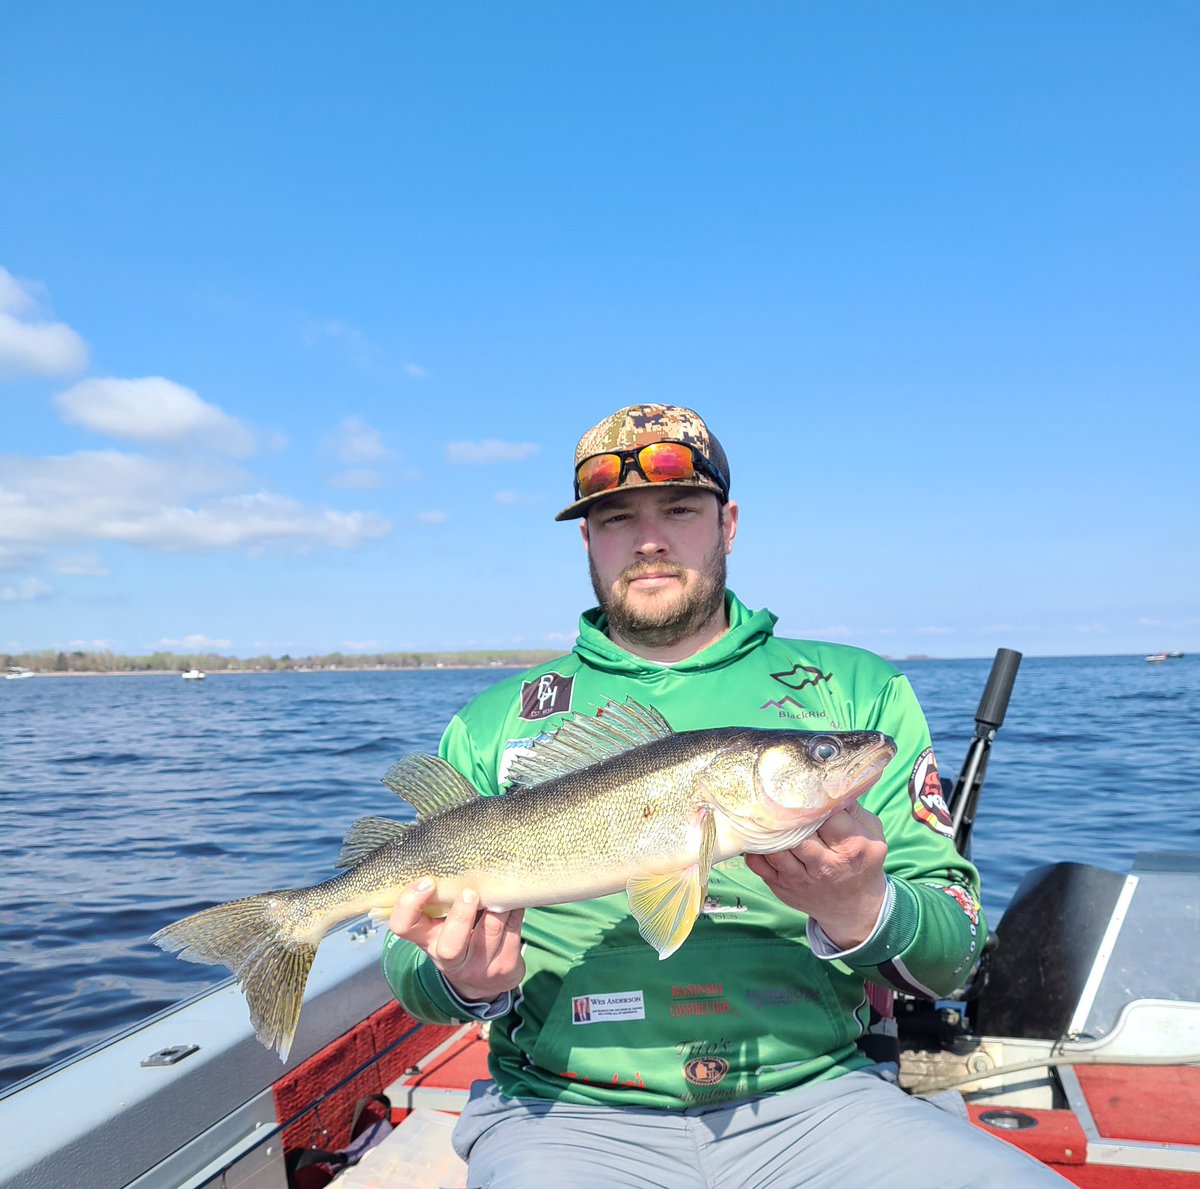 MN fishing opener was great! Hangin' with @andyz1700 Good weather. Good bite. Good times! #walleye #Minnesota https://t.co/EIVCCO1GYu